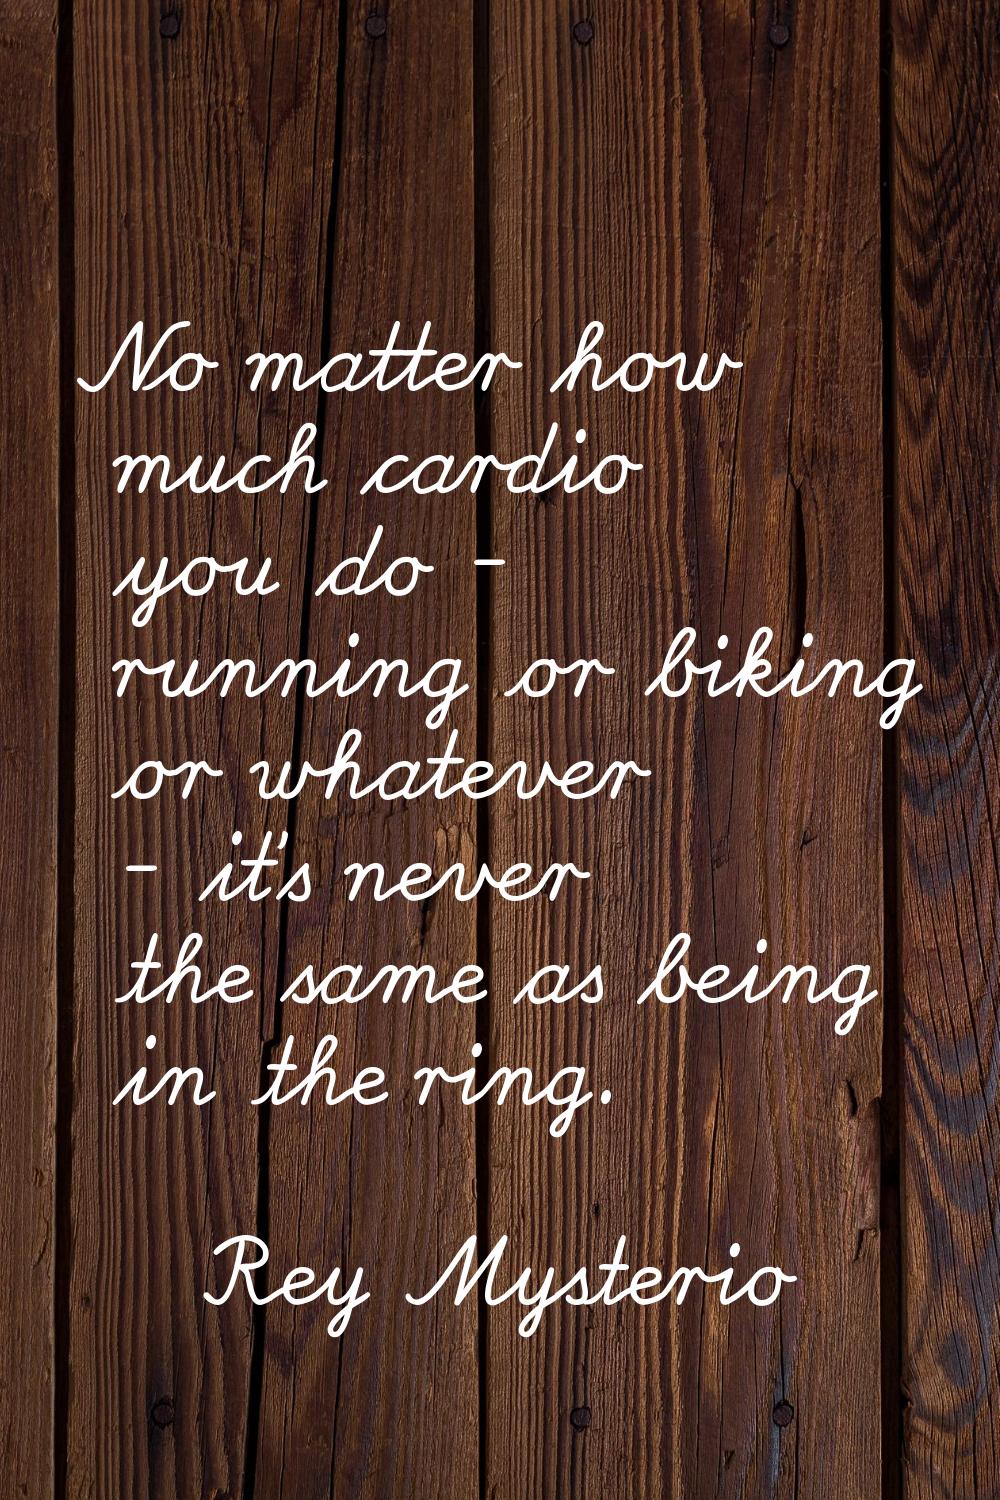 No matter how much cardio you do - running or biking or whatever - it's never the same as being in 